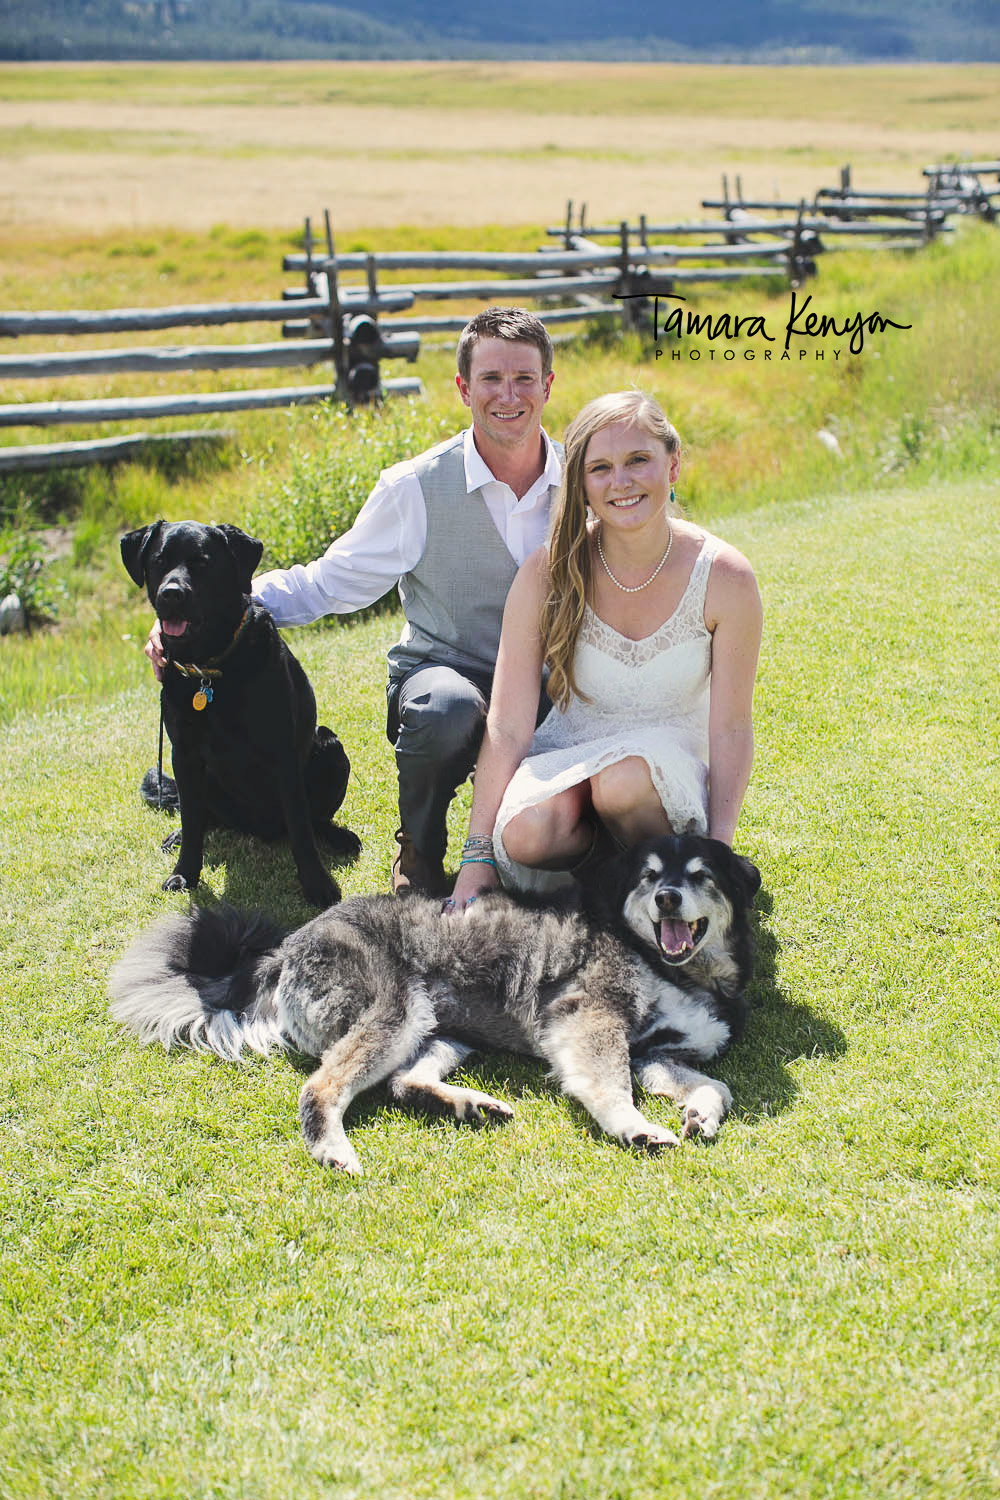 wedding photo with dogs